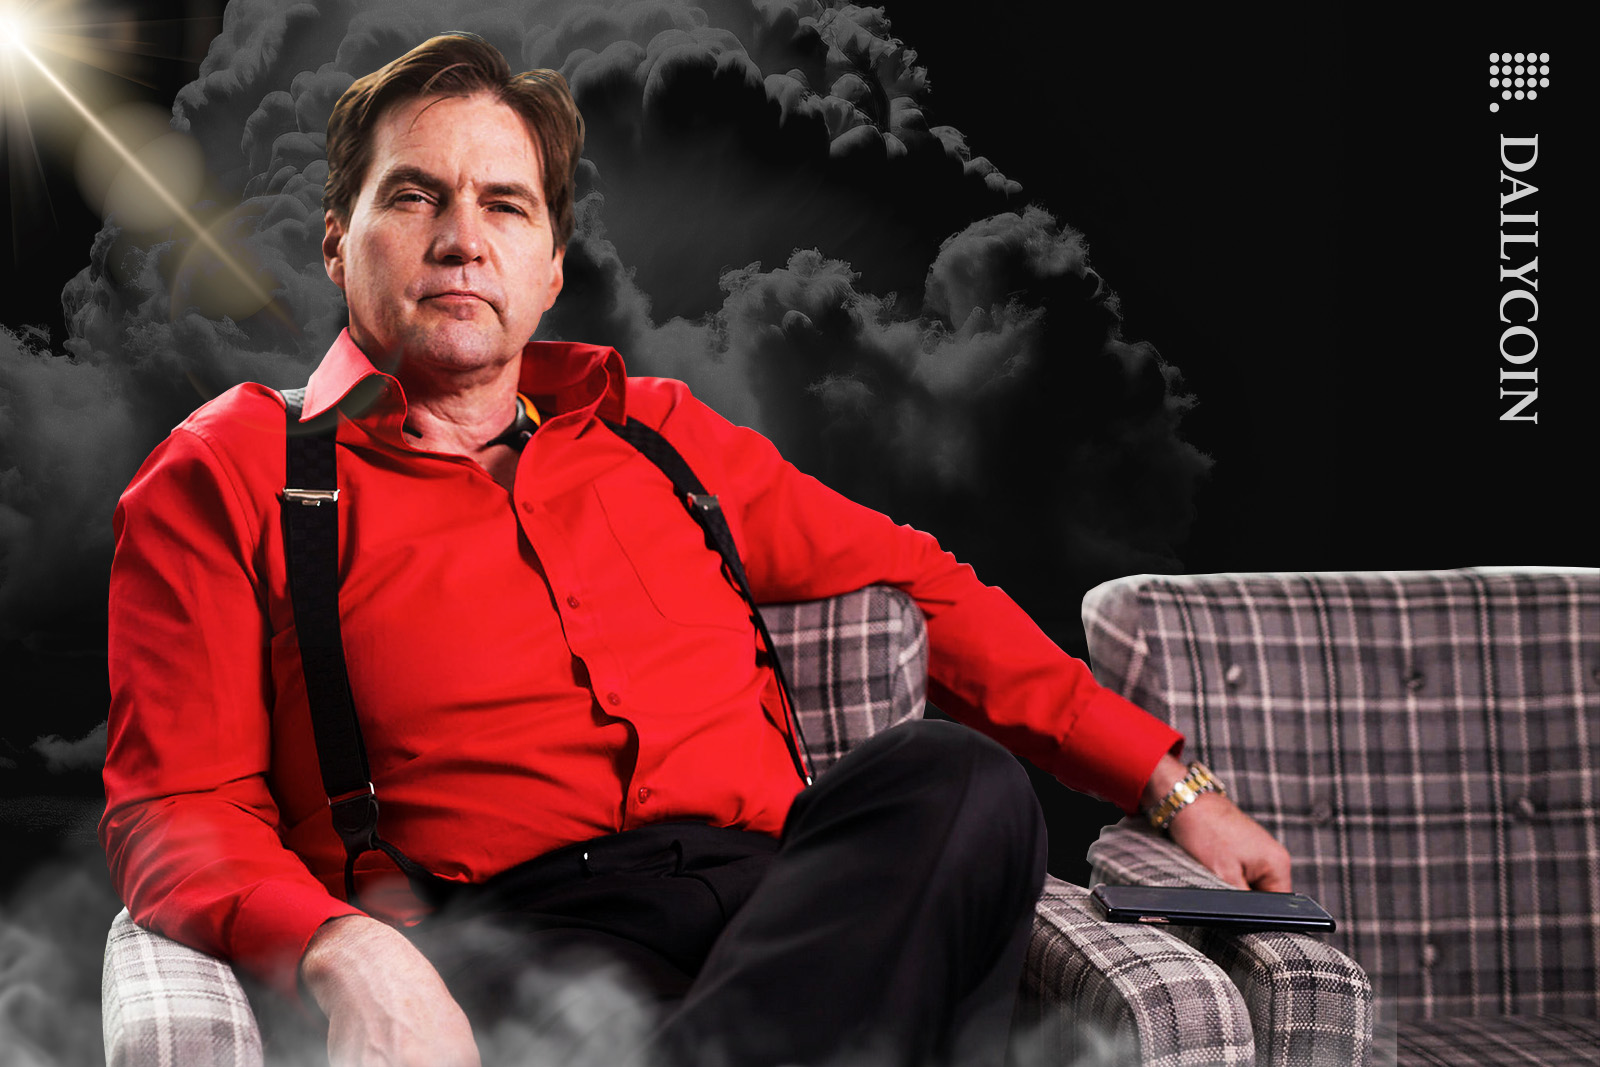 Dr. Craig Wright in a bright red shirt sitting in an armchair with a thretening look in his eyes.